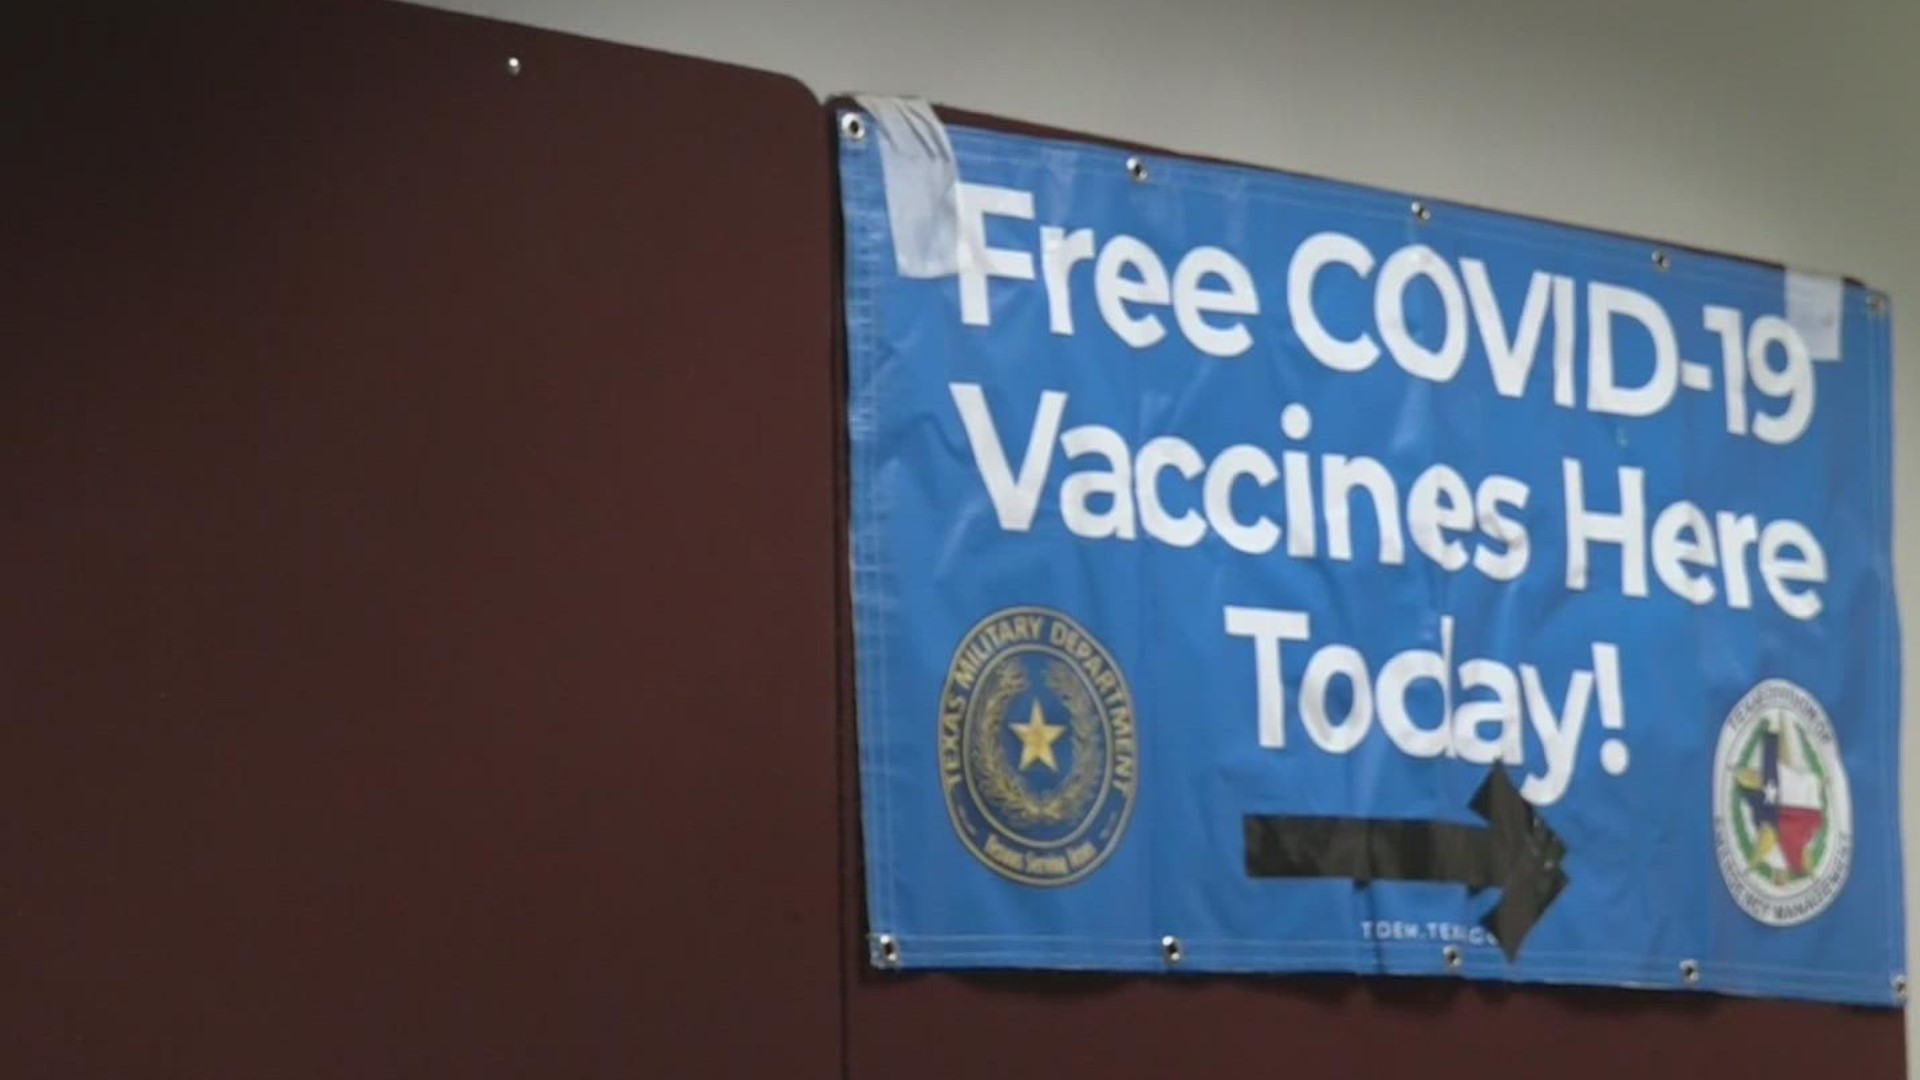 Following the Center for Disease Control's recommendation that was announced on Sunday, Texas A&M University has begun to offer free COVID -19 vaccines to children